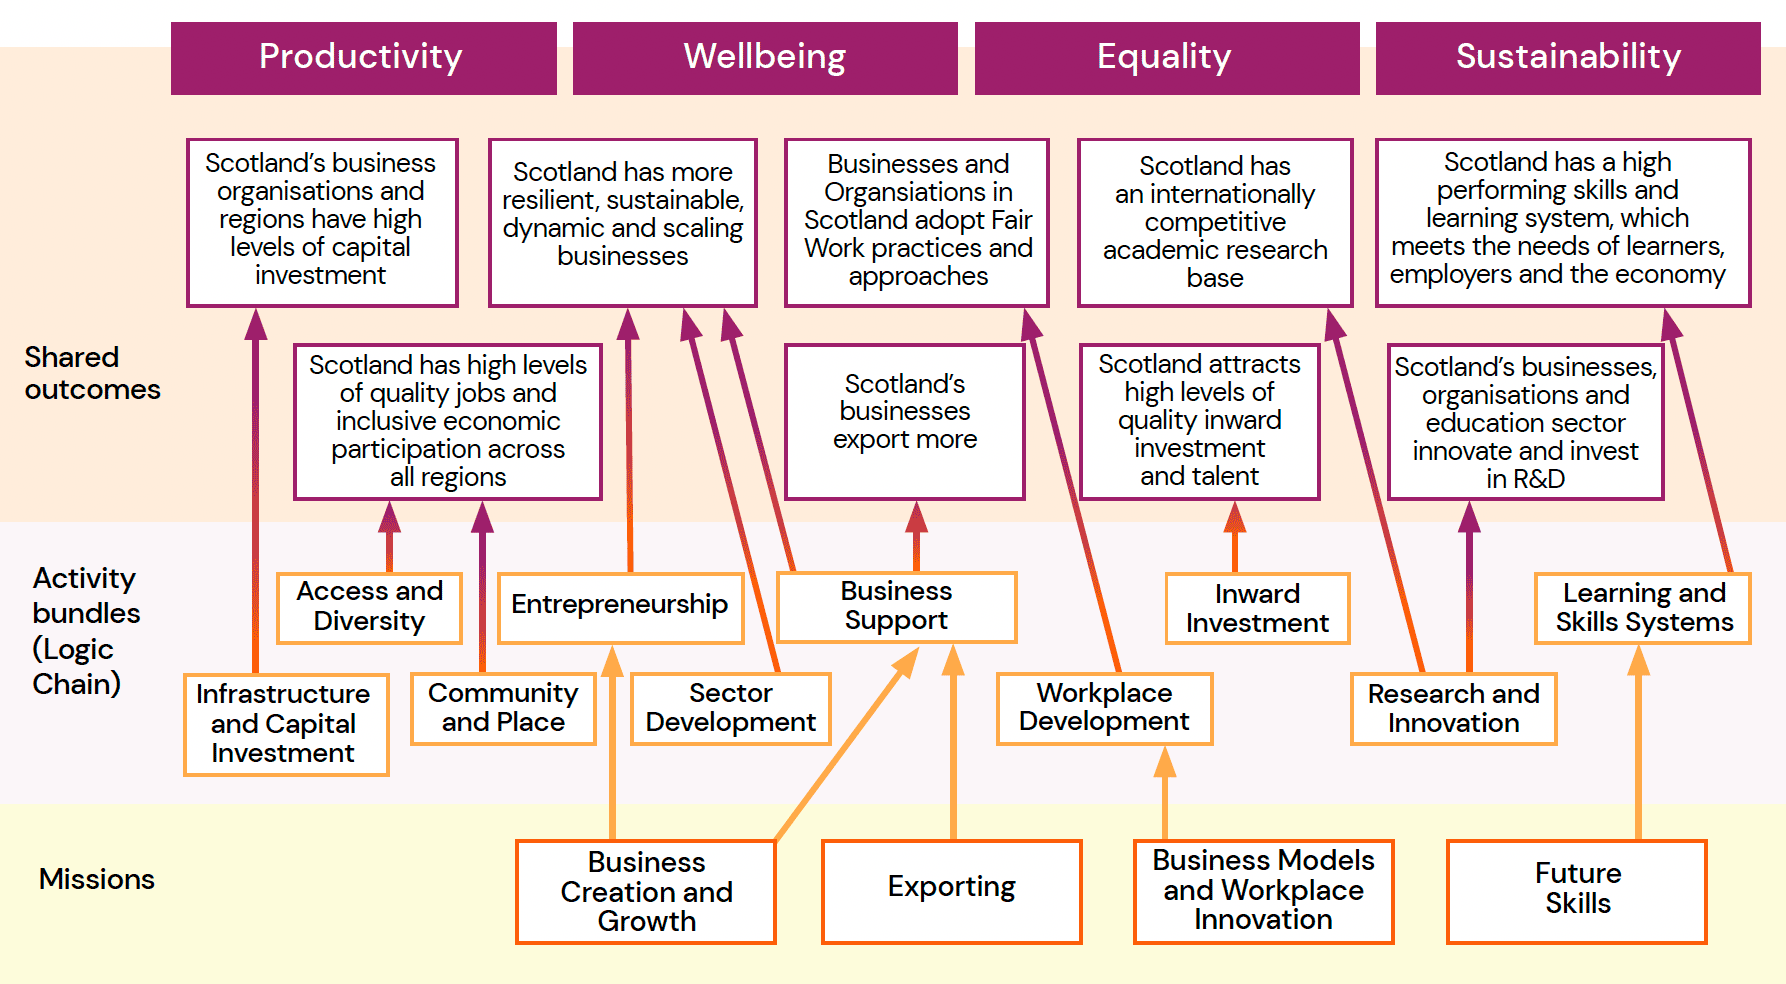 The logic model showing linkage of the shared outcomes, activity bundles and missions in the context of the four overarching ambitions of the ESSB.